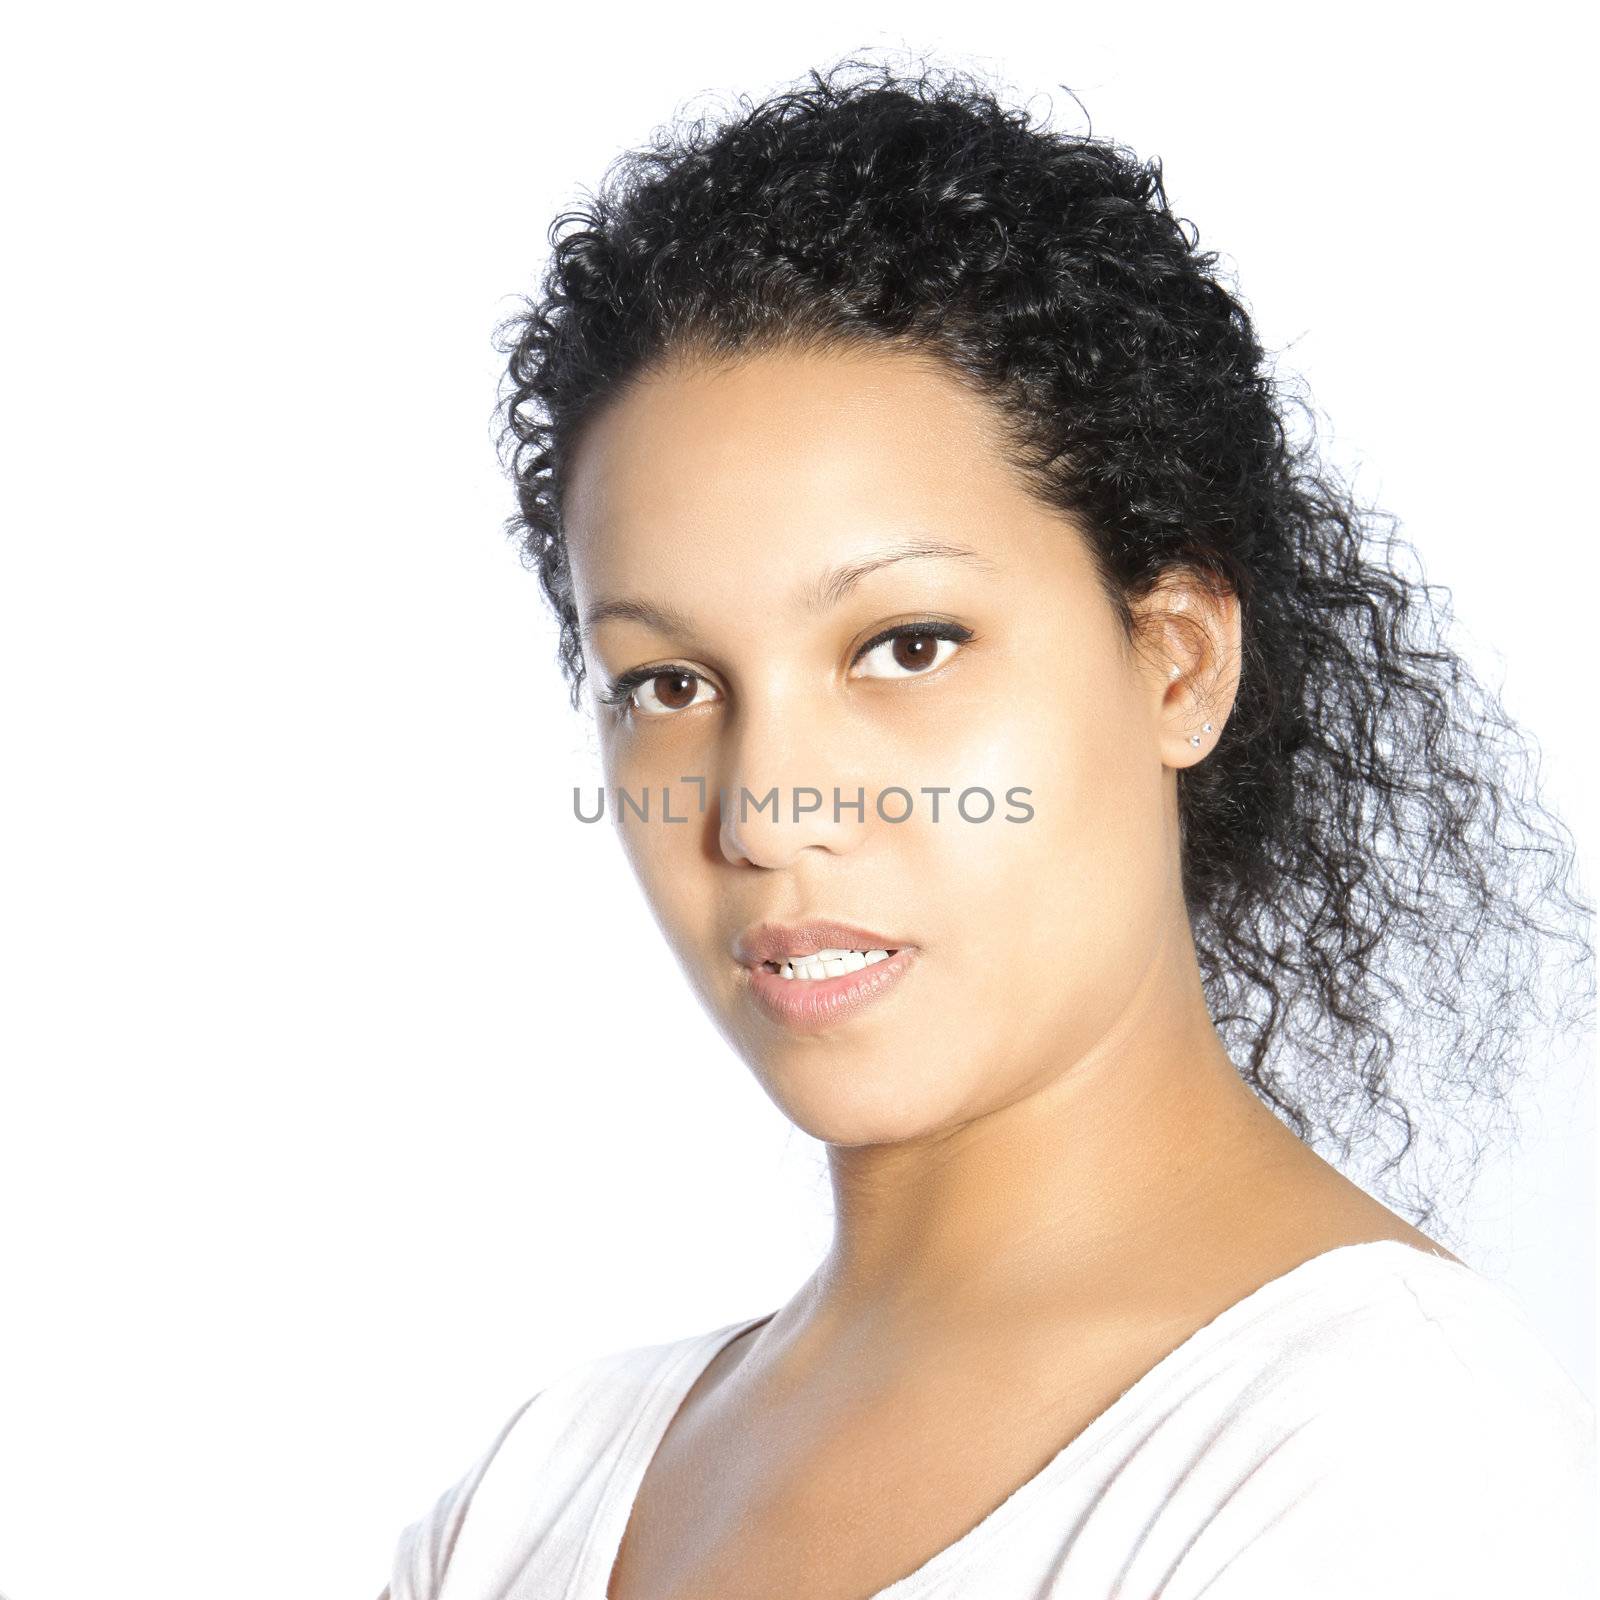 Closeup head portrait of a serious beautiful young African American woman looking at the camera isolated on white